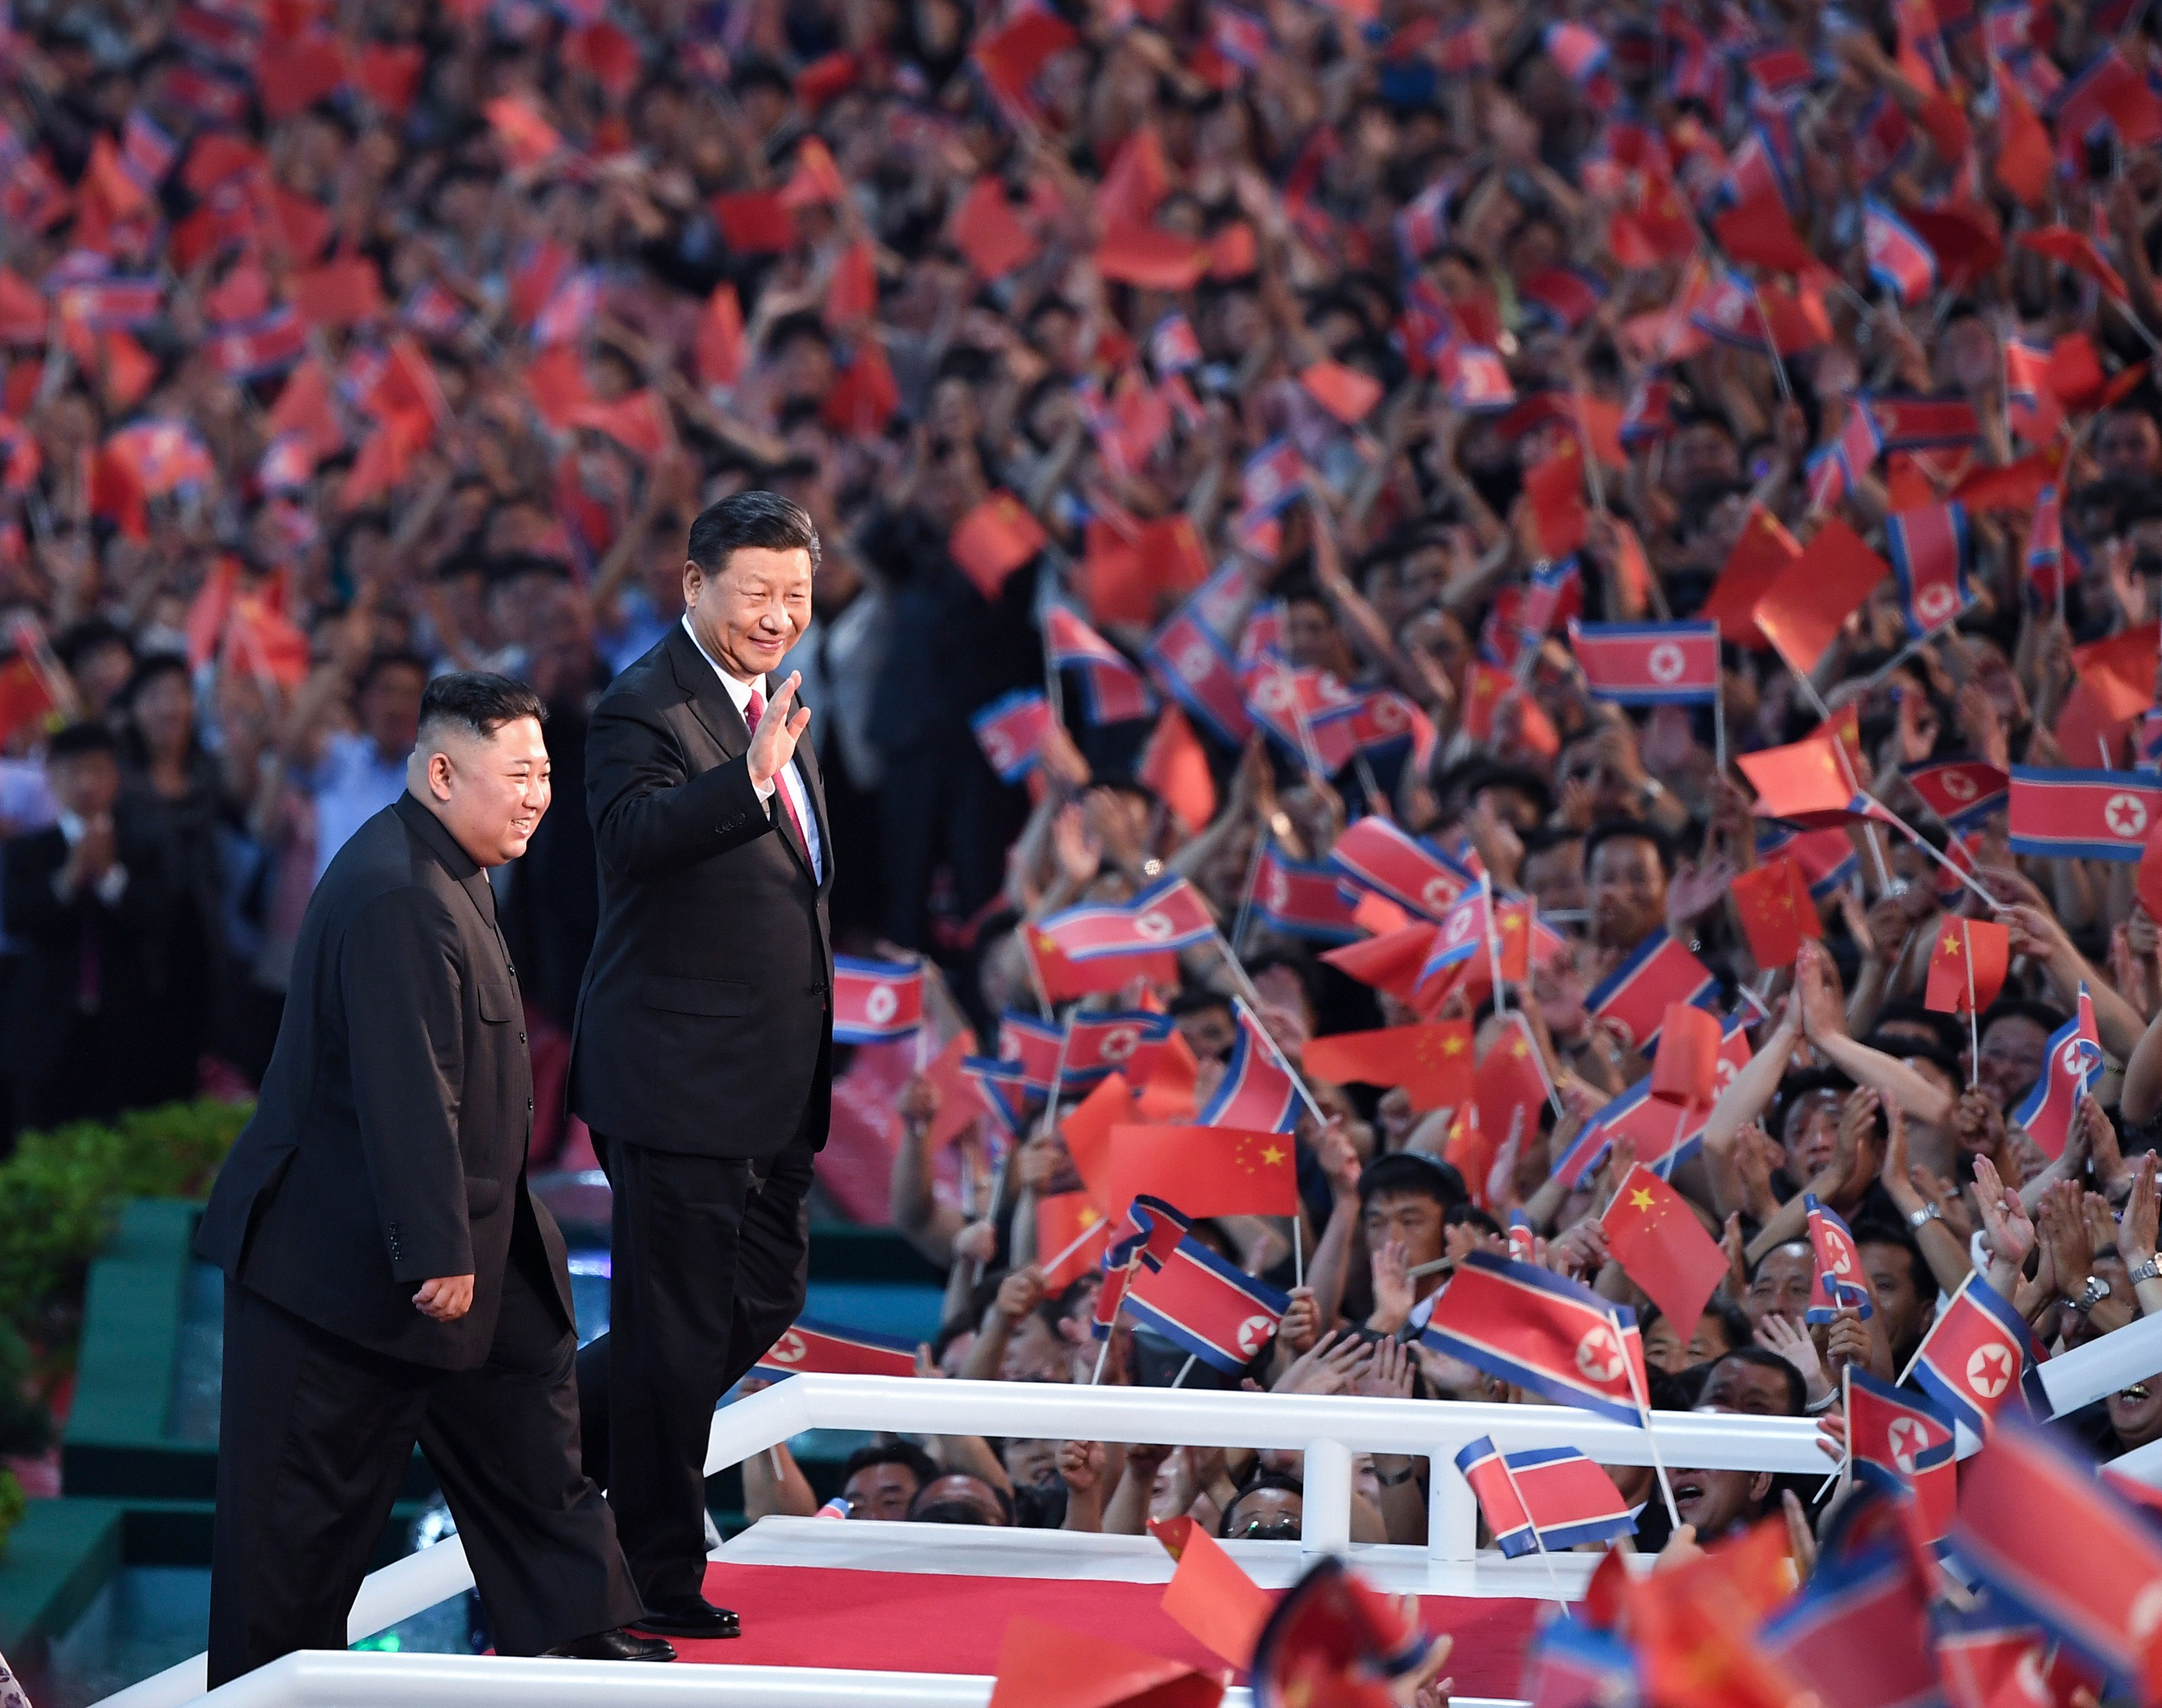 Chinese President Xi Jinping and North Korean leader Kim Jong-un attend a performance at the May Day Stadium in Pyongyang on June 20, 2019. Photo: Xinhua